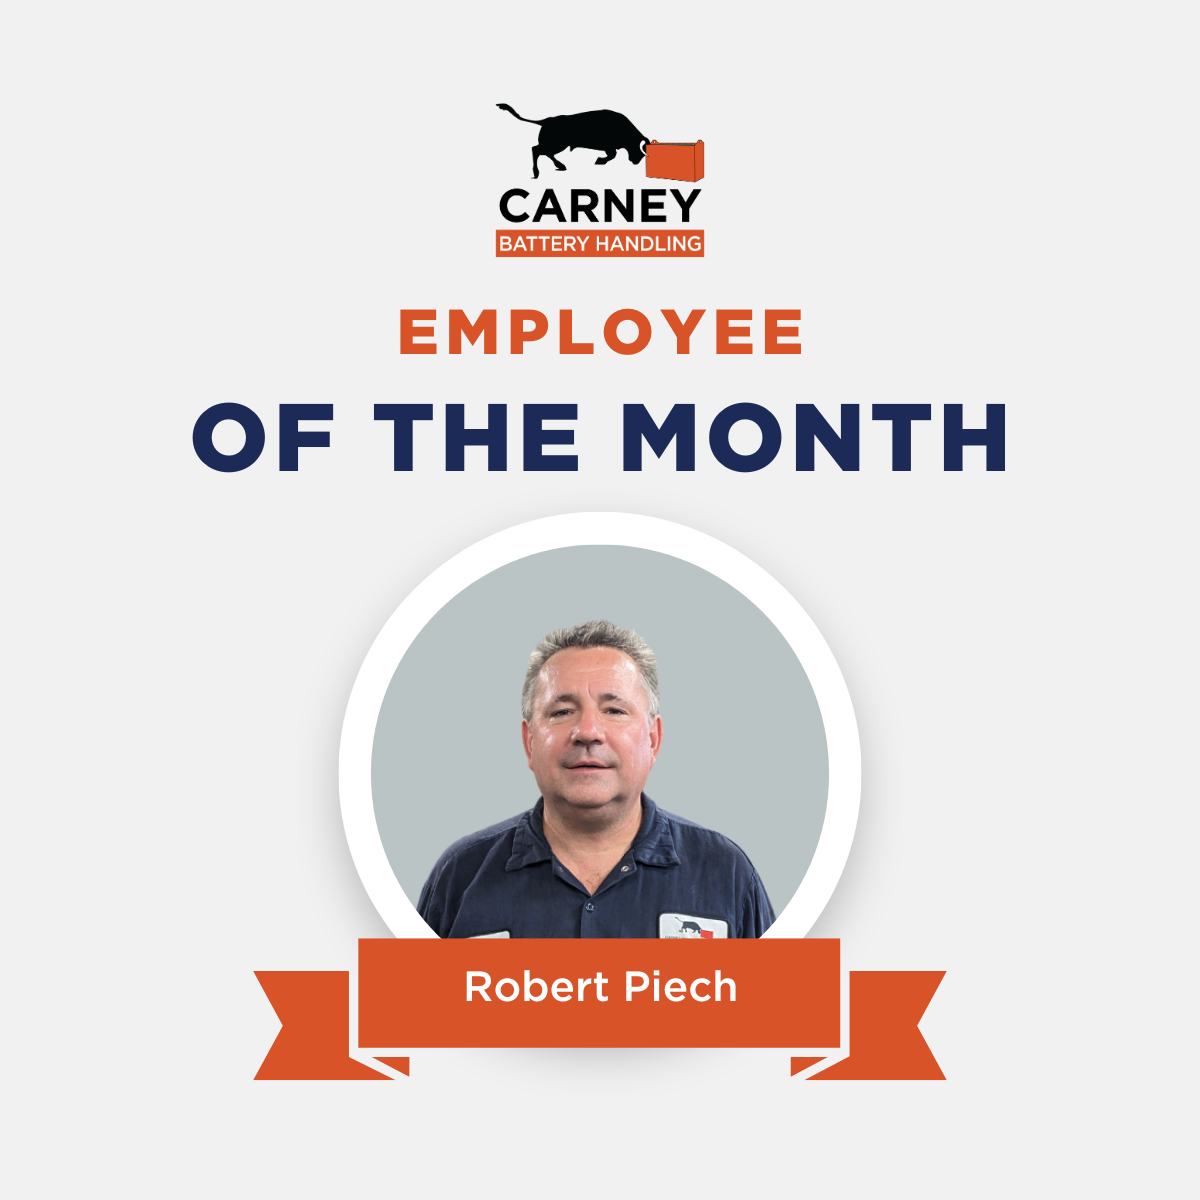 #EmployeeSpotlight This month, we celebrate Fitter/Welder Robert Piech, a senior member of the production team at Carney, who has been ensuring that every product is perfectly constructed since 1999. Thank you, Robert! #carneybatteryhandling #employeeofthemonth